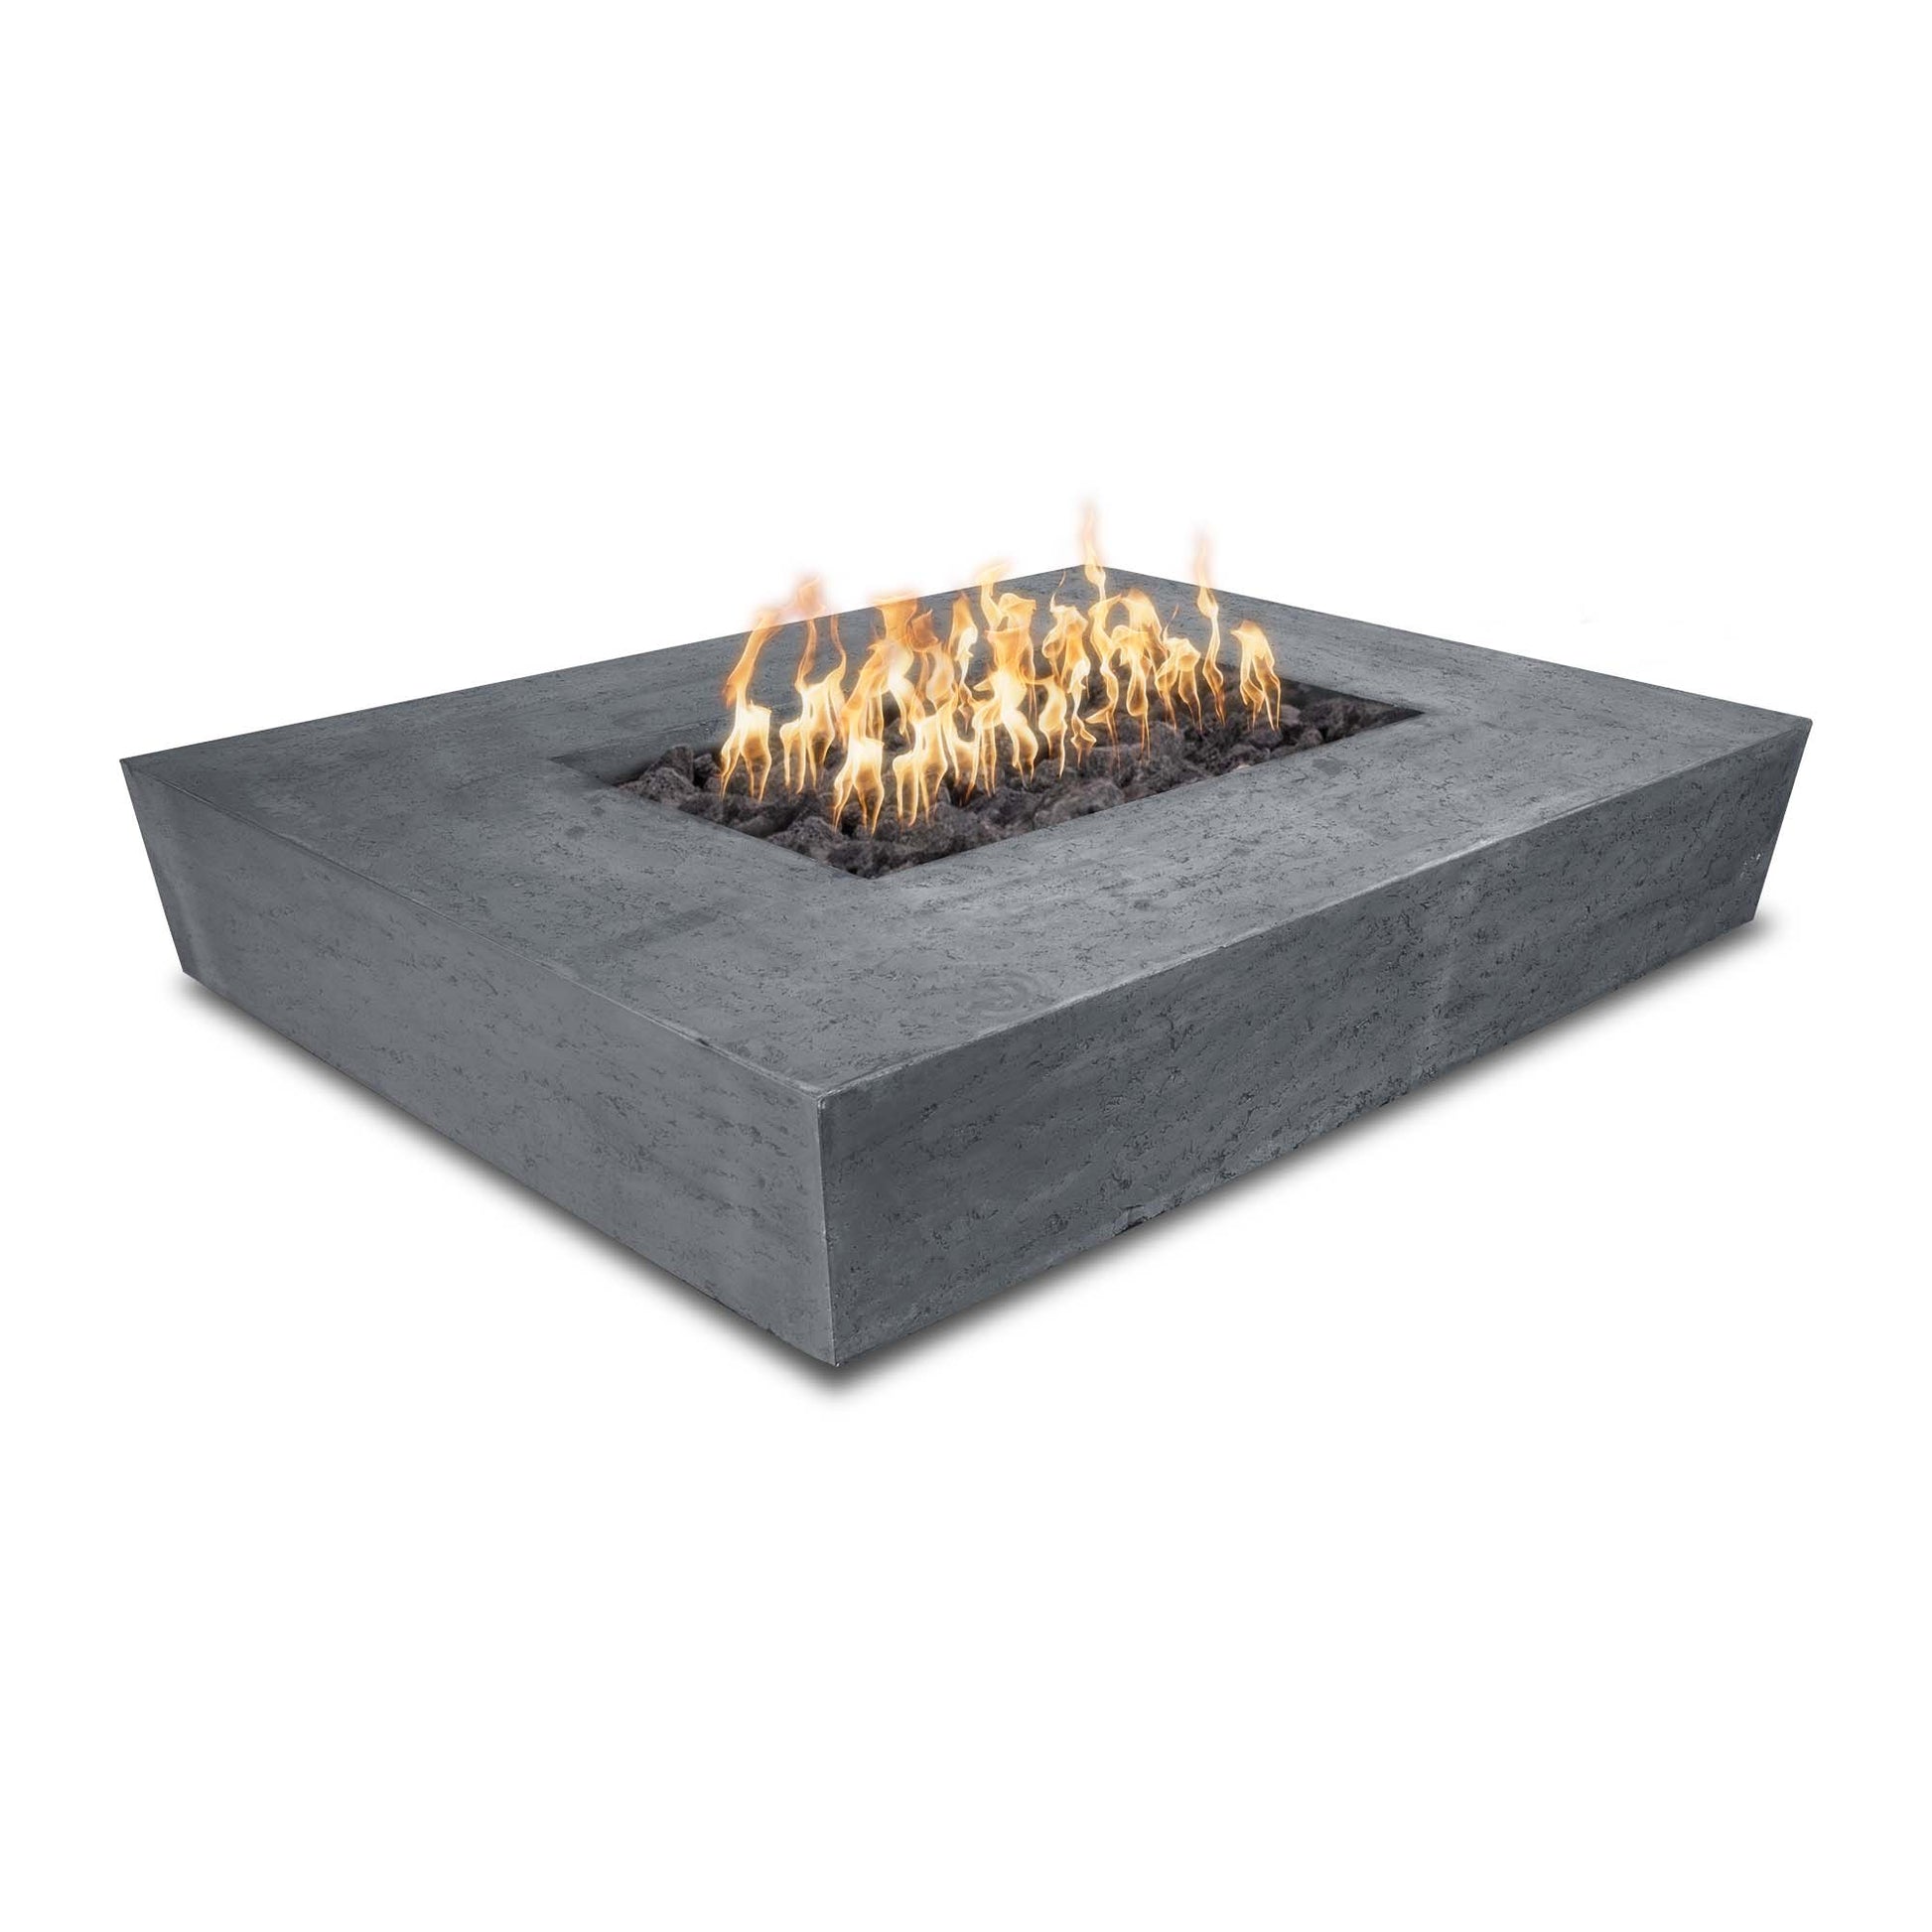 The Outdoor Plus Rectangular Heiko 58" Ash GFRC Concrete Liquid Propane Fire Pit with Flame Sense with Spark Ignition